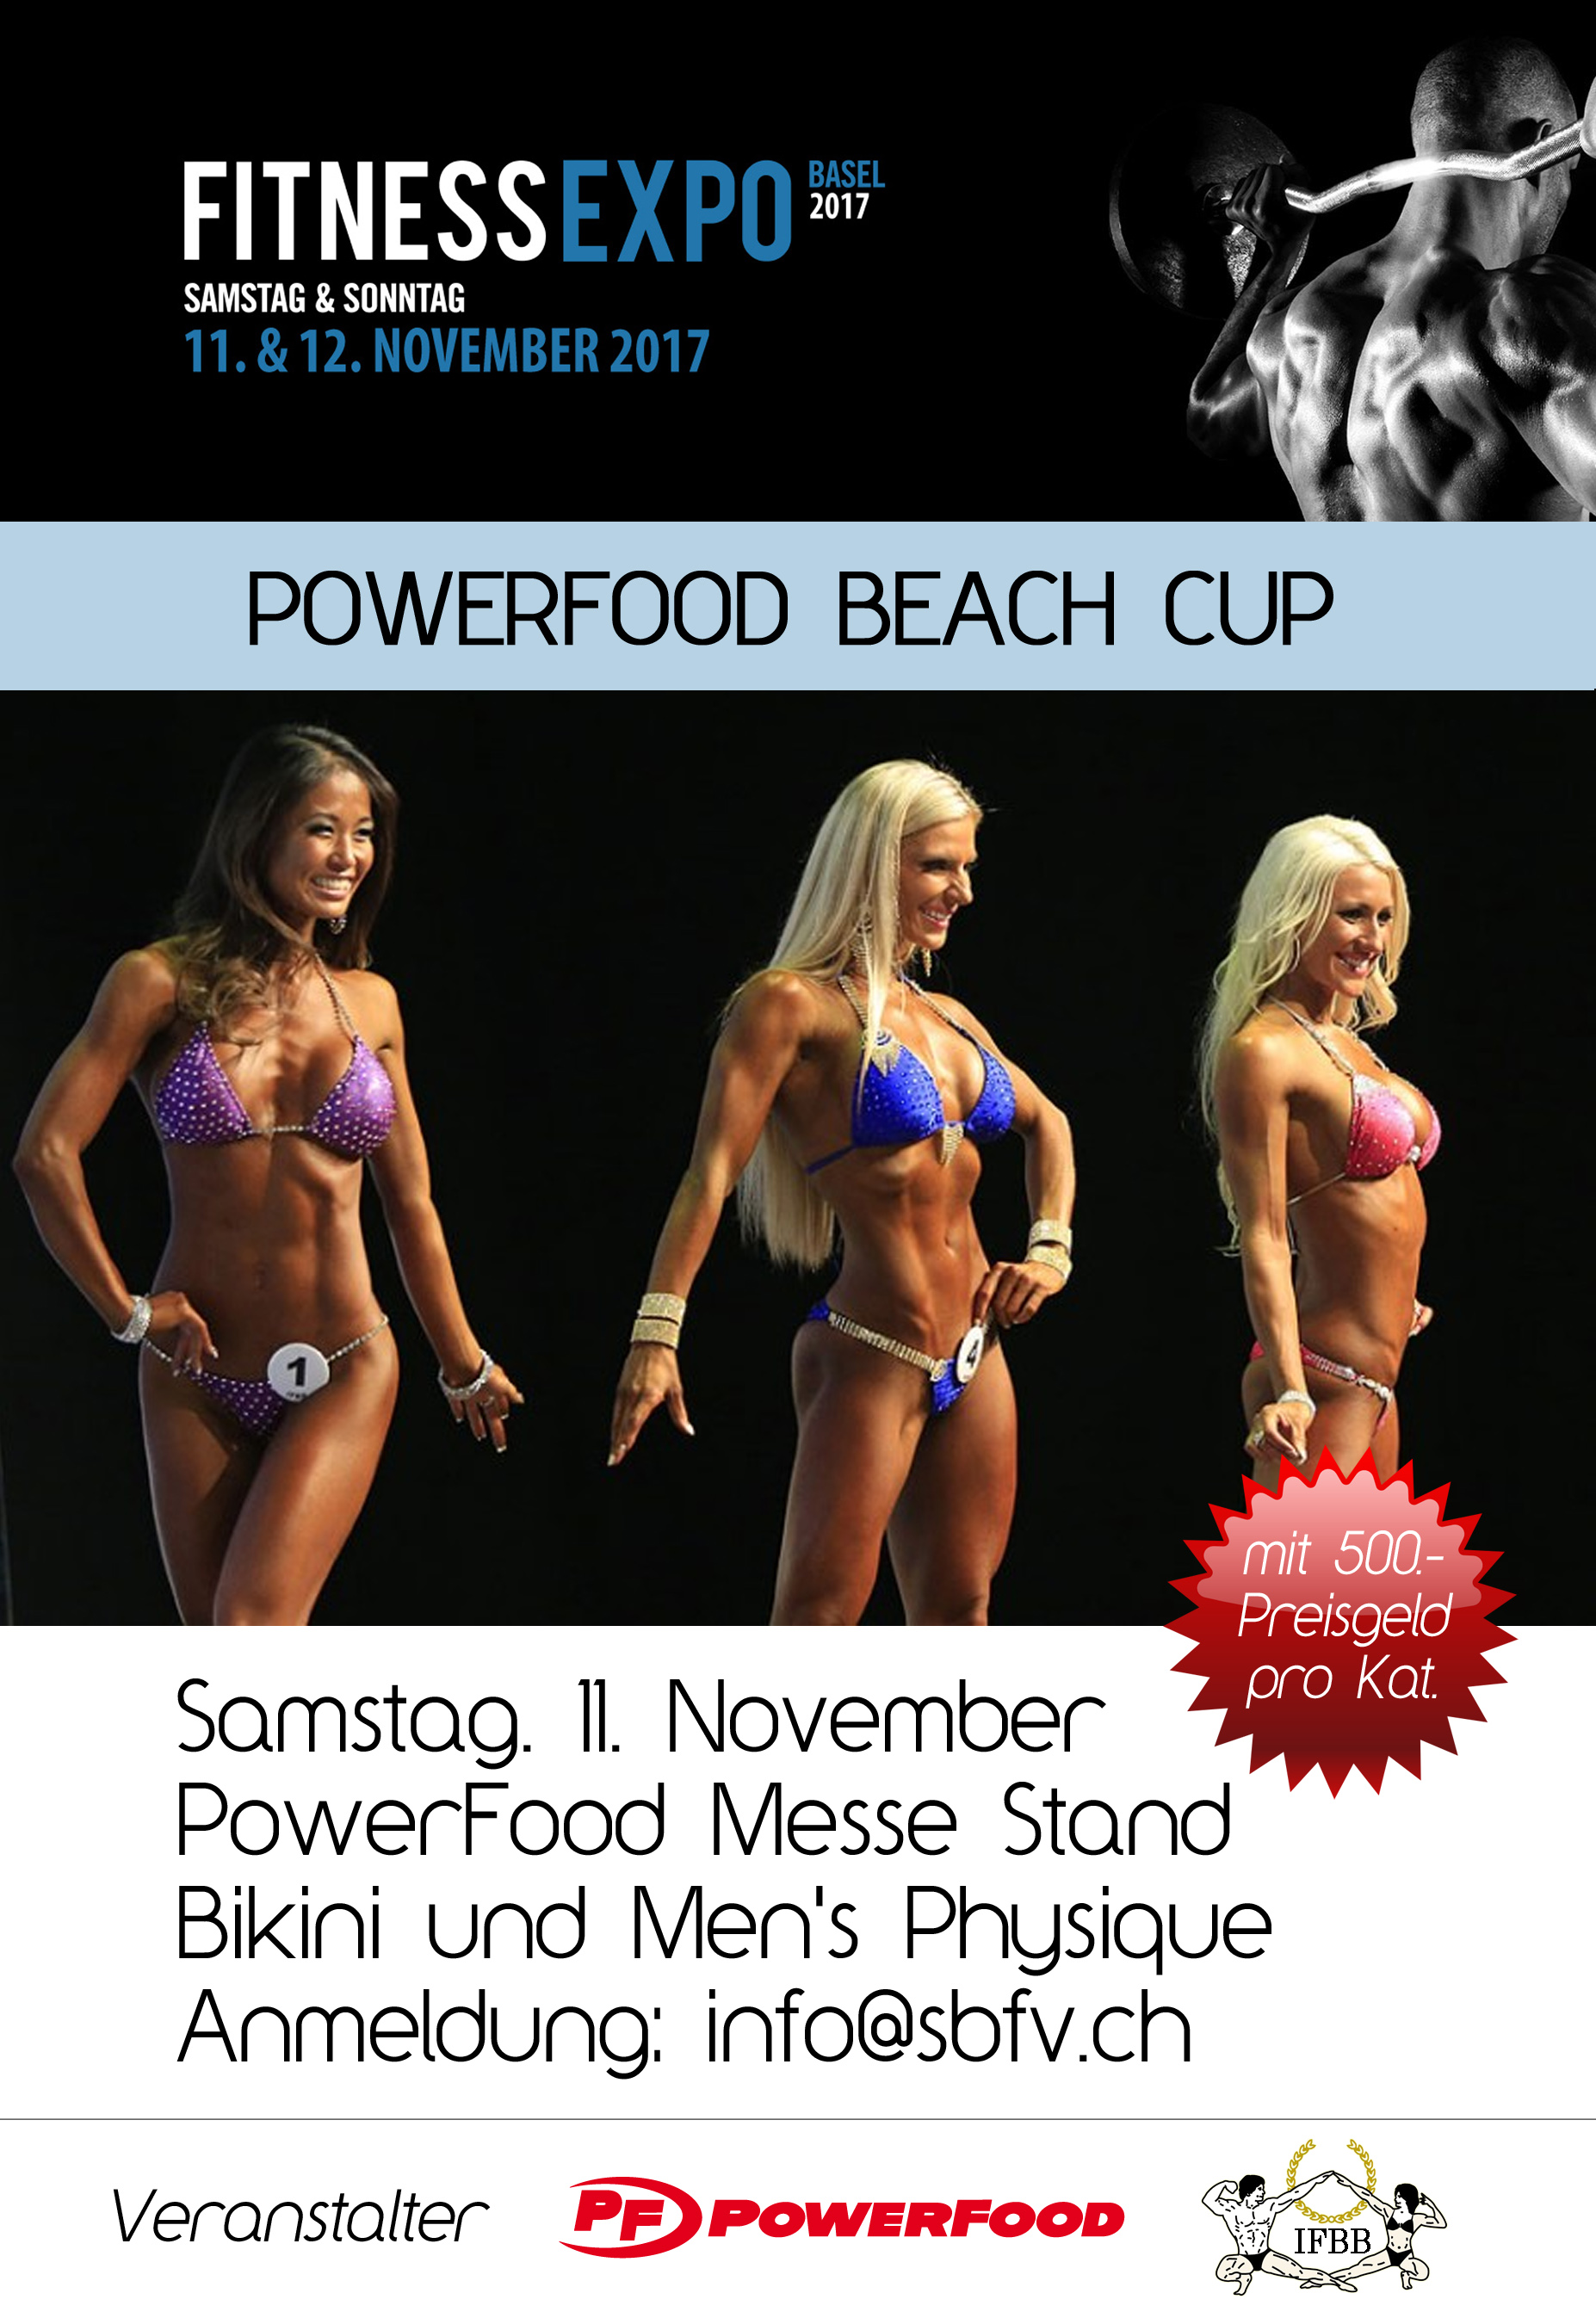 PowerFood an der Fitness EXPO in Basel